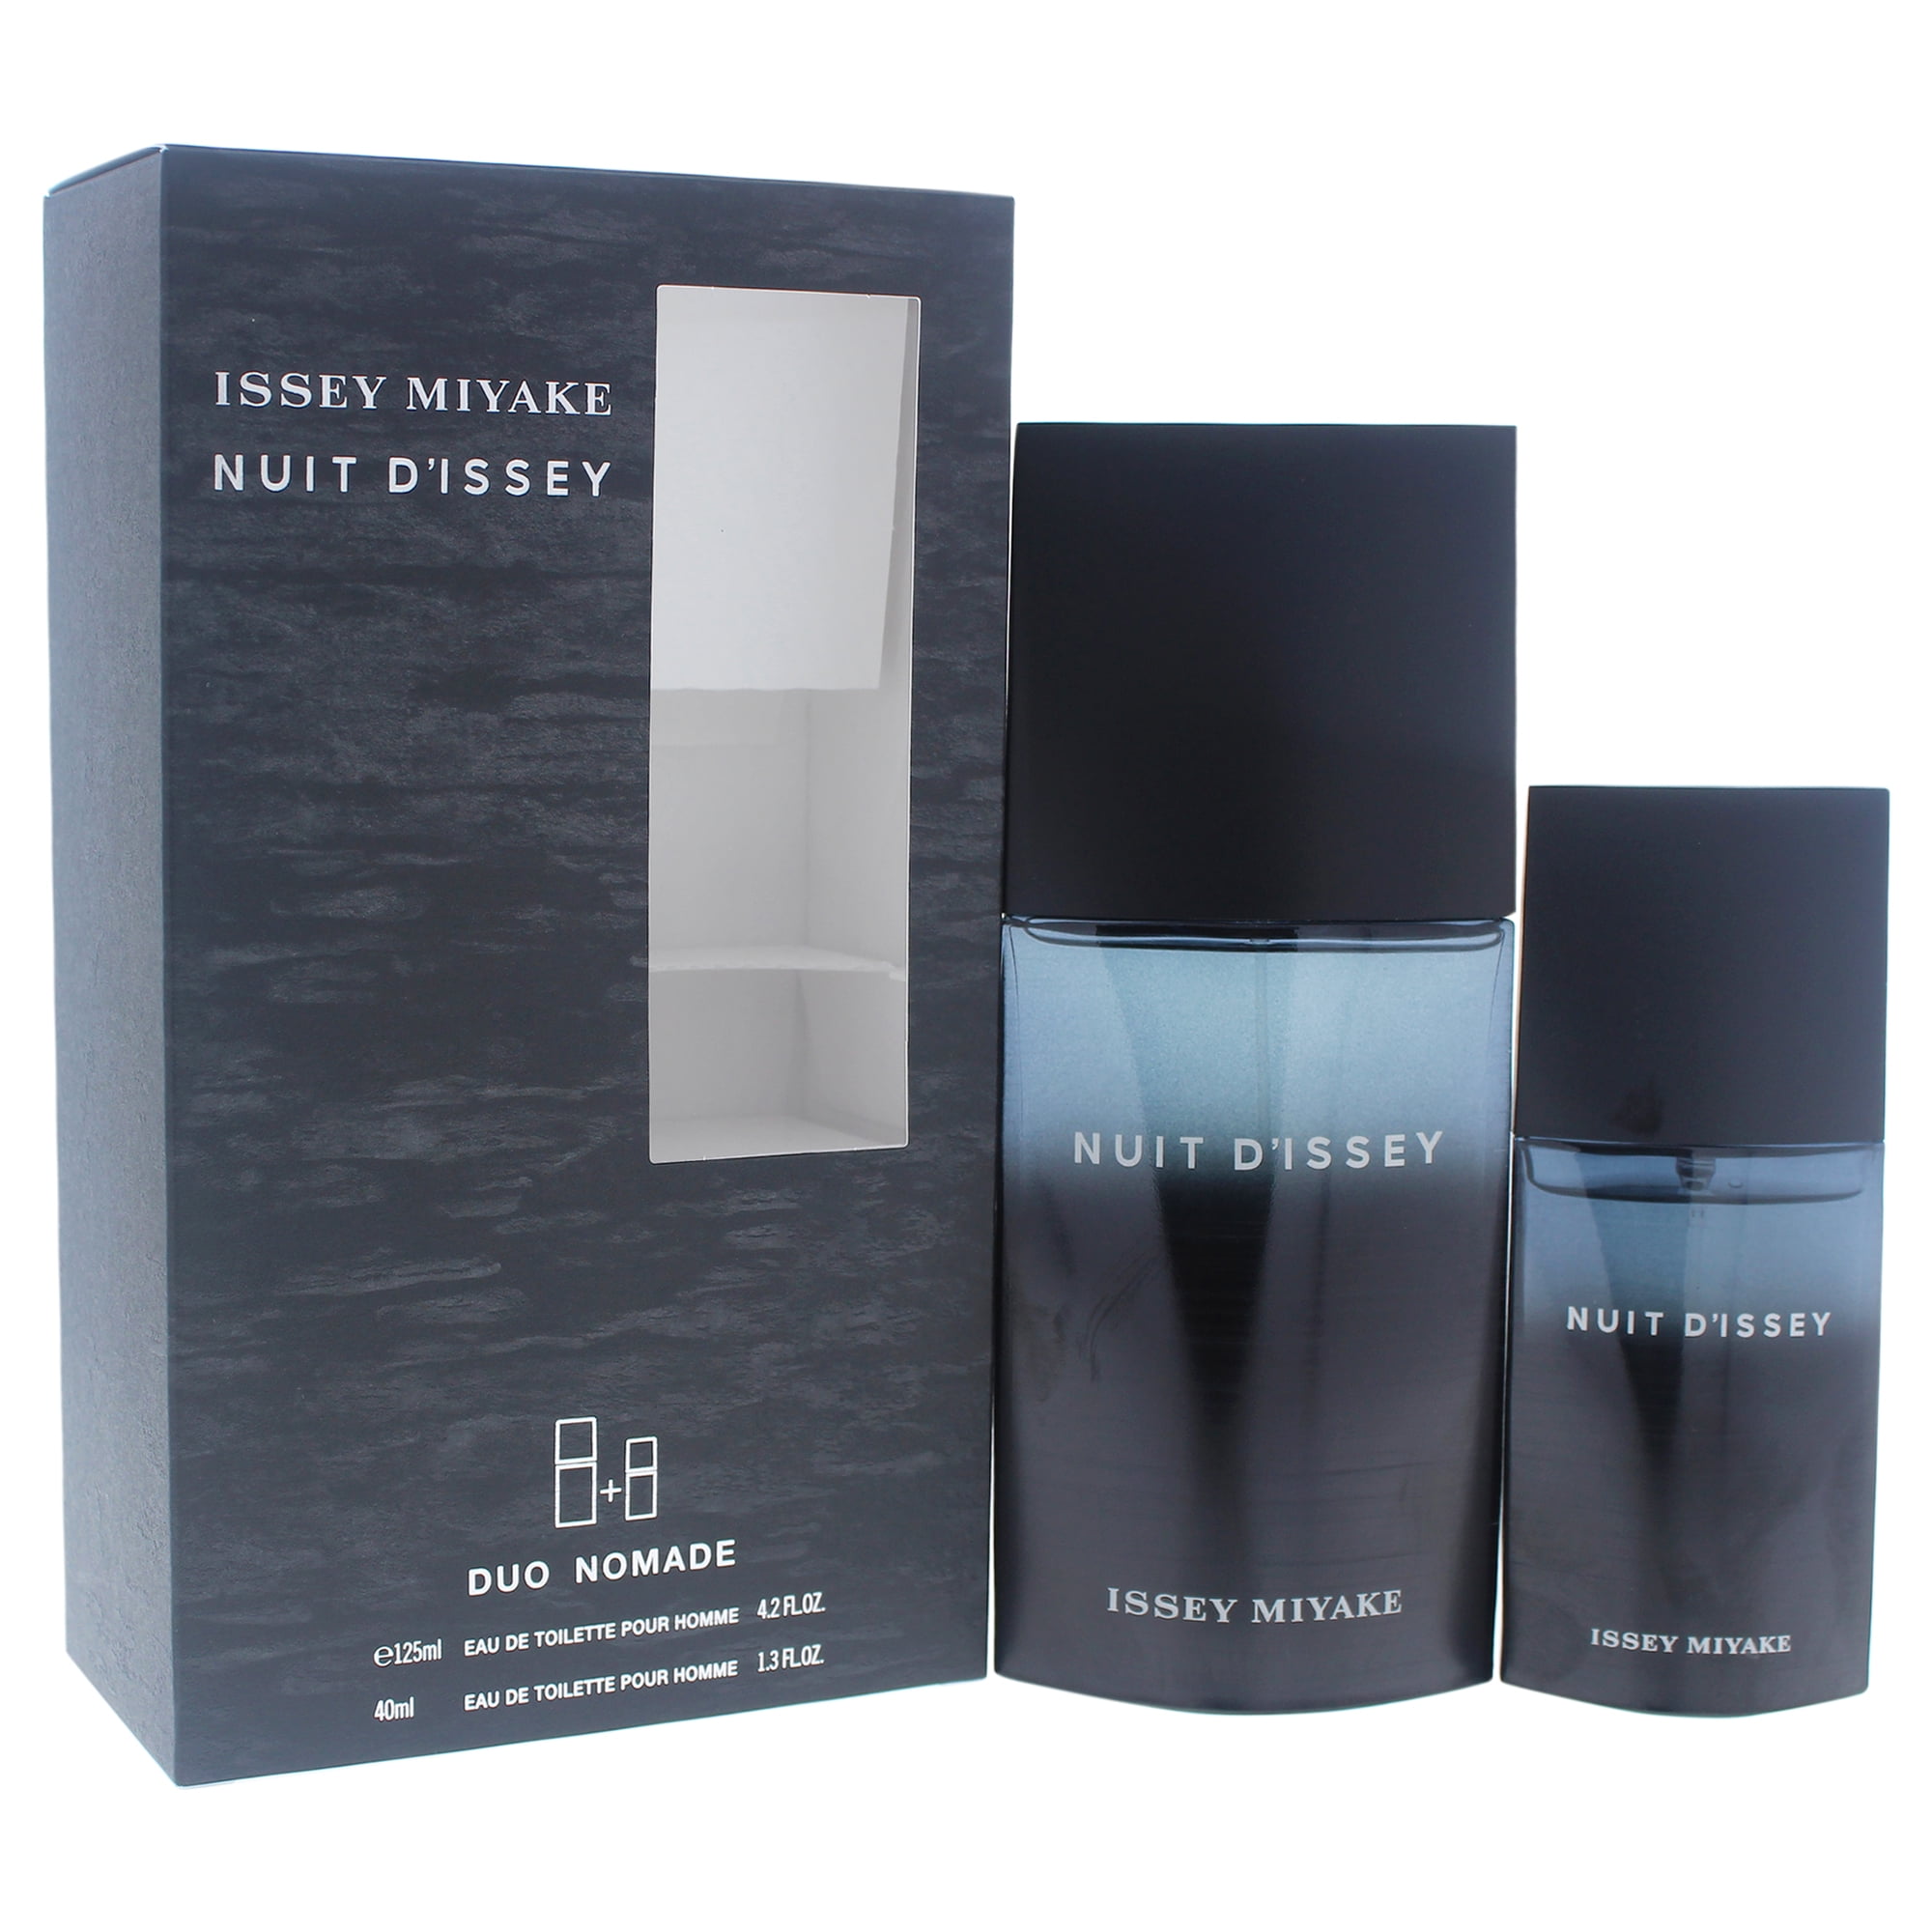 Issey Miyake - Issey Miyake Nuit D'Issey Cologne Gift Set for Men, 2